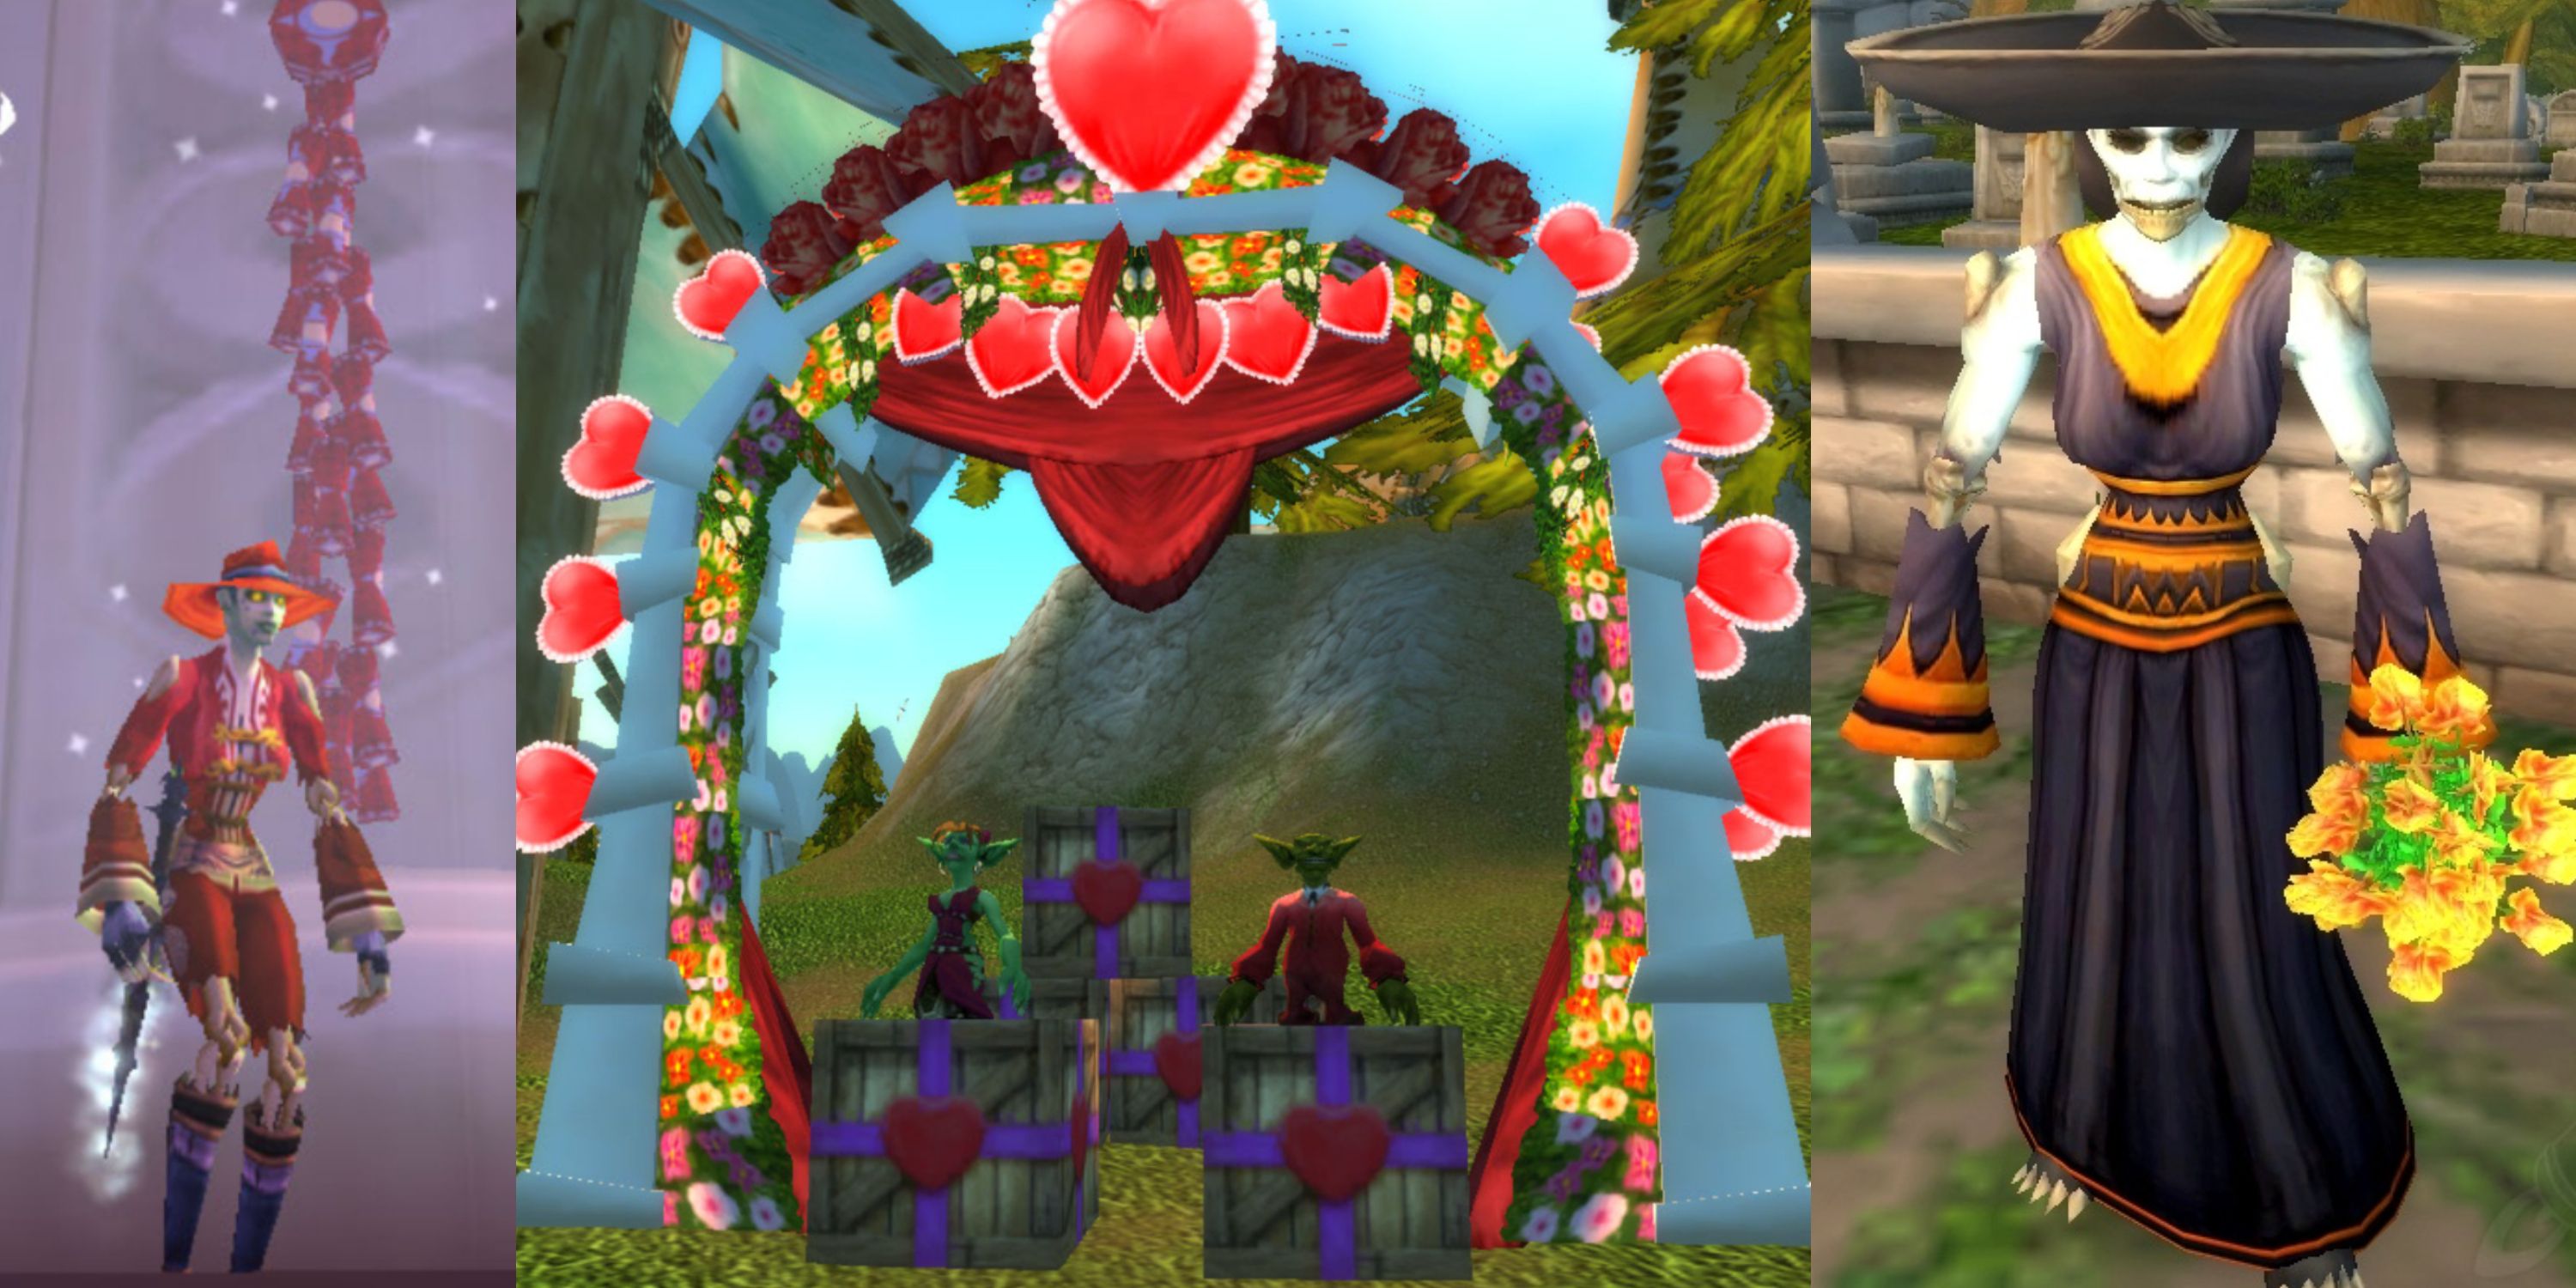 Cover Photo List of Wow Events Moon Festival Love is in the Air Day of the Dead